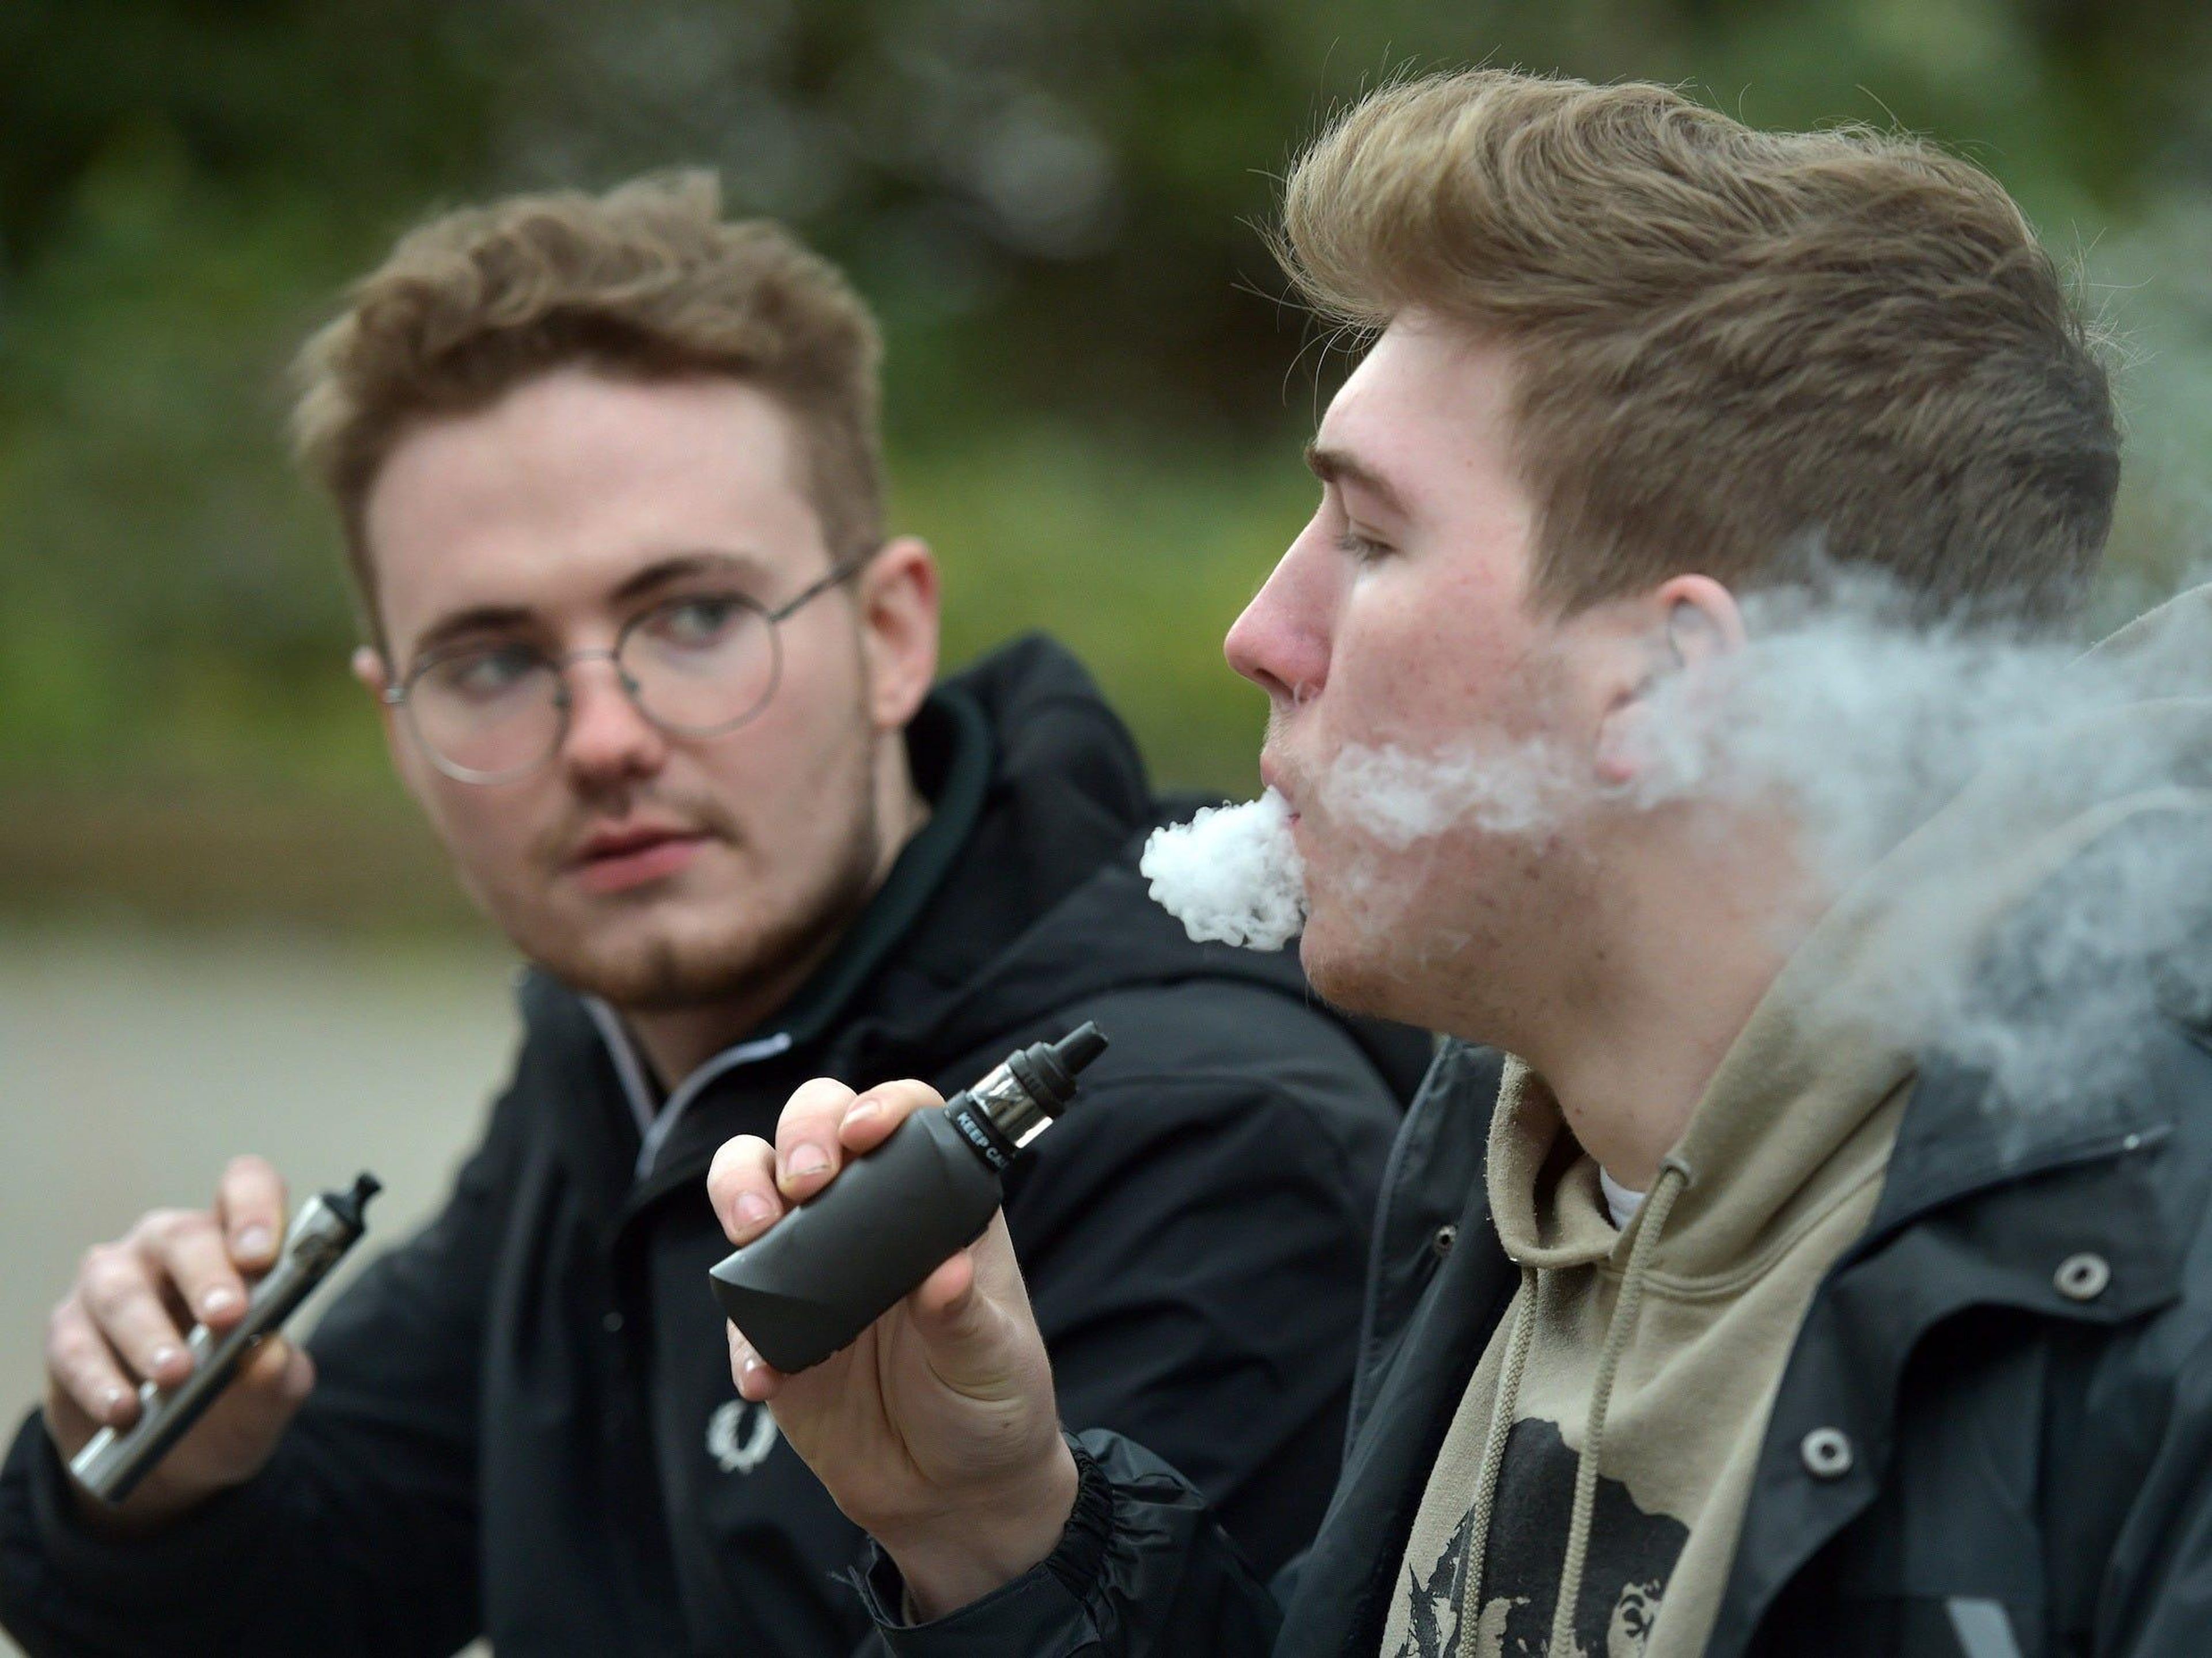 Men vaping. Nick Ansell/PA Wire/Getty Images